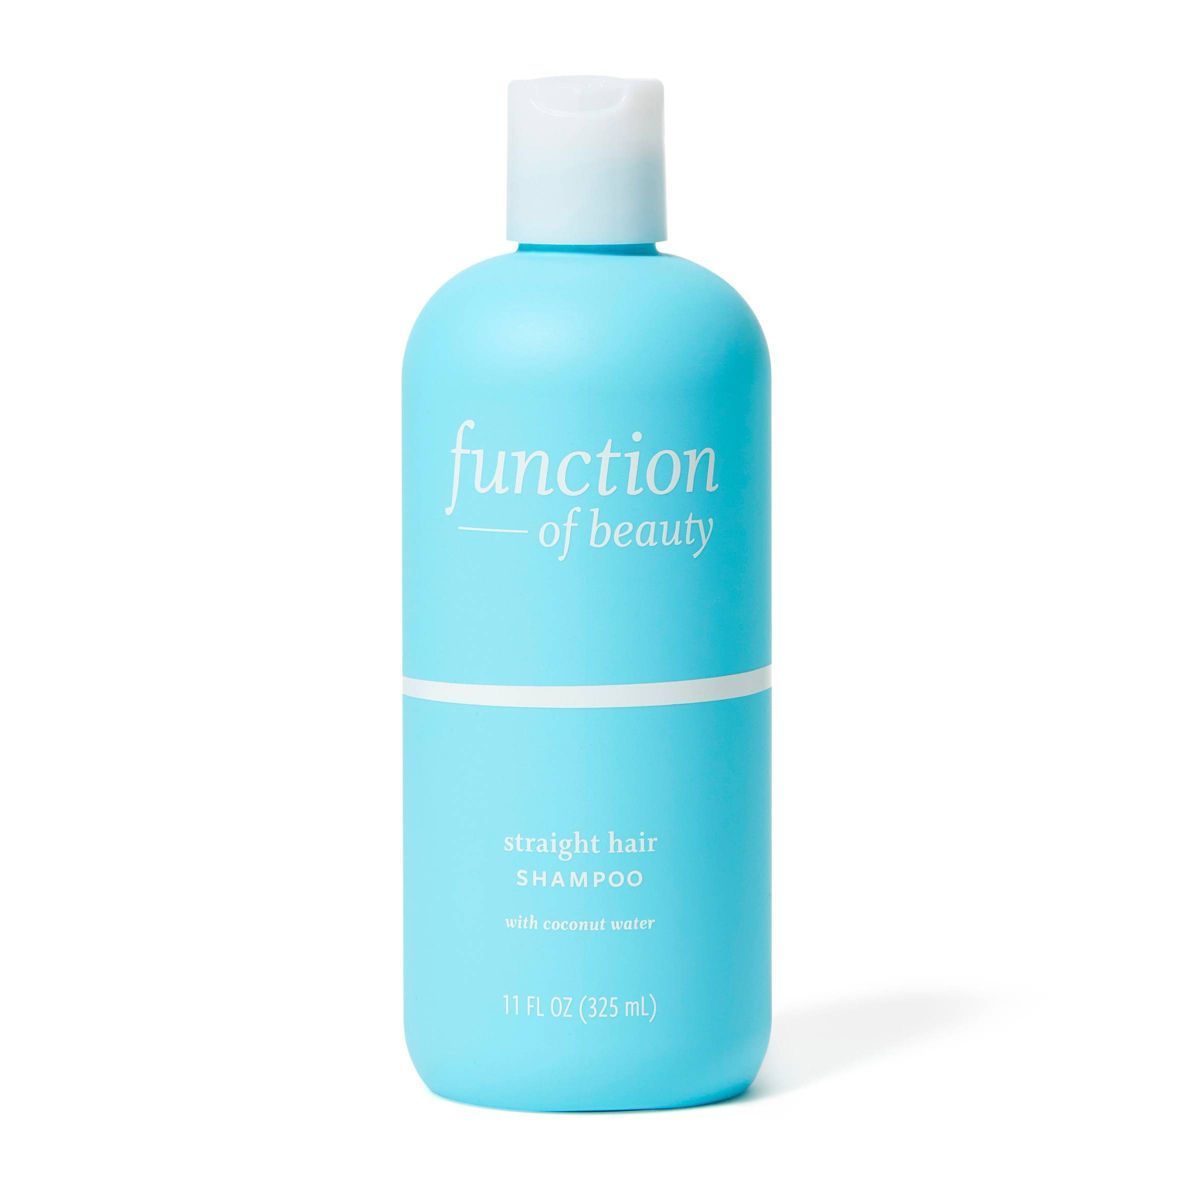 Function of Beauty Custom Straight Hair Shampoo Base with Coconut Water - 11 fl oz | Target